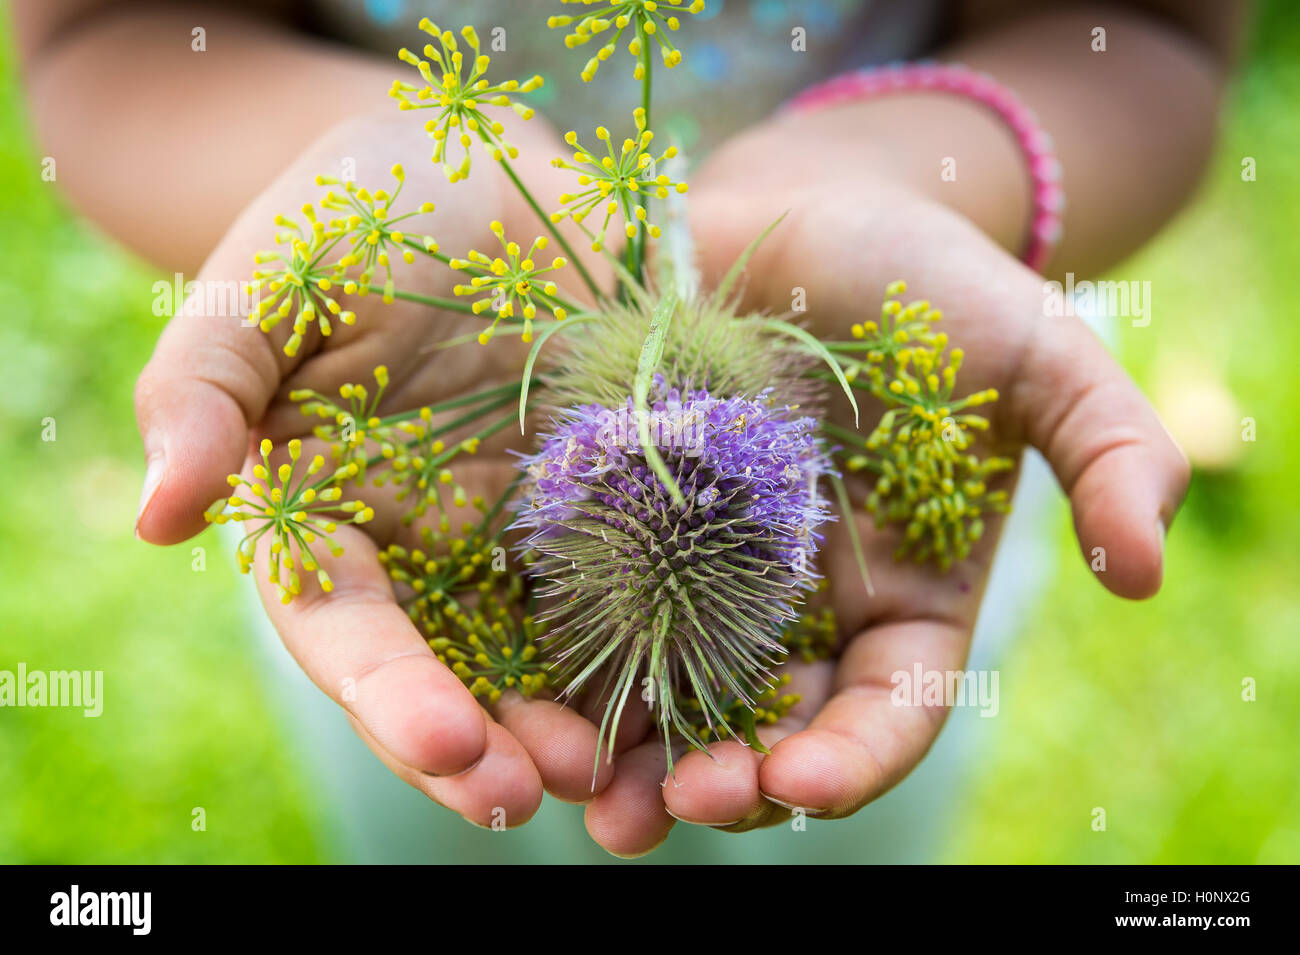 Wild teasels (Dipsacus fullonum) and fennel (Foeniculum vulgare) flowers in hands, Germany Stock Photo